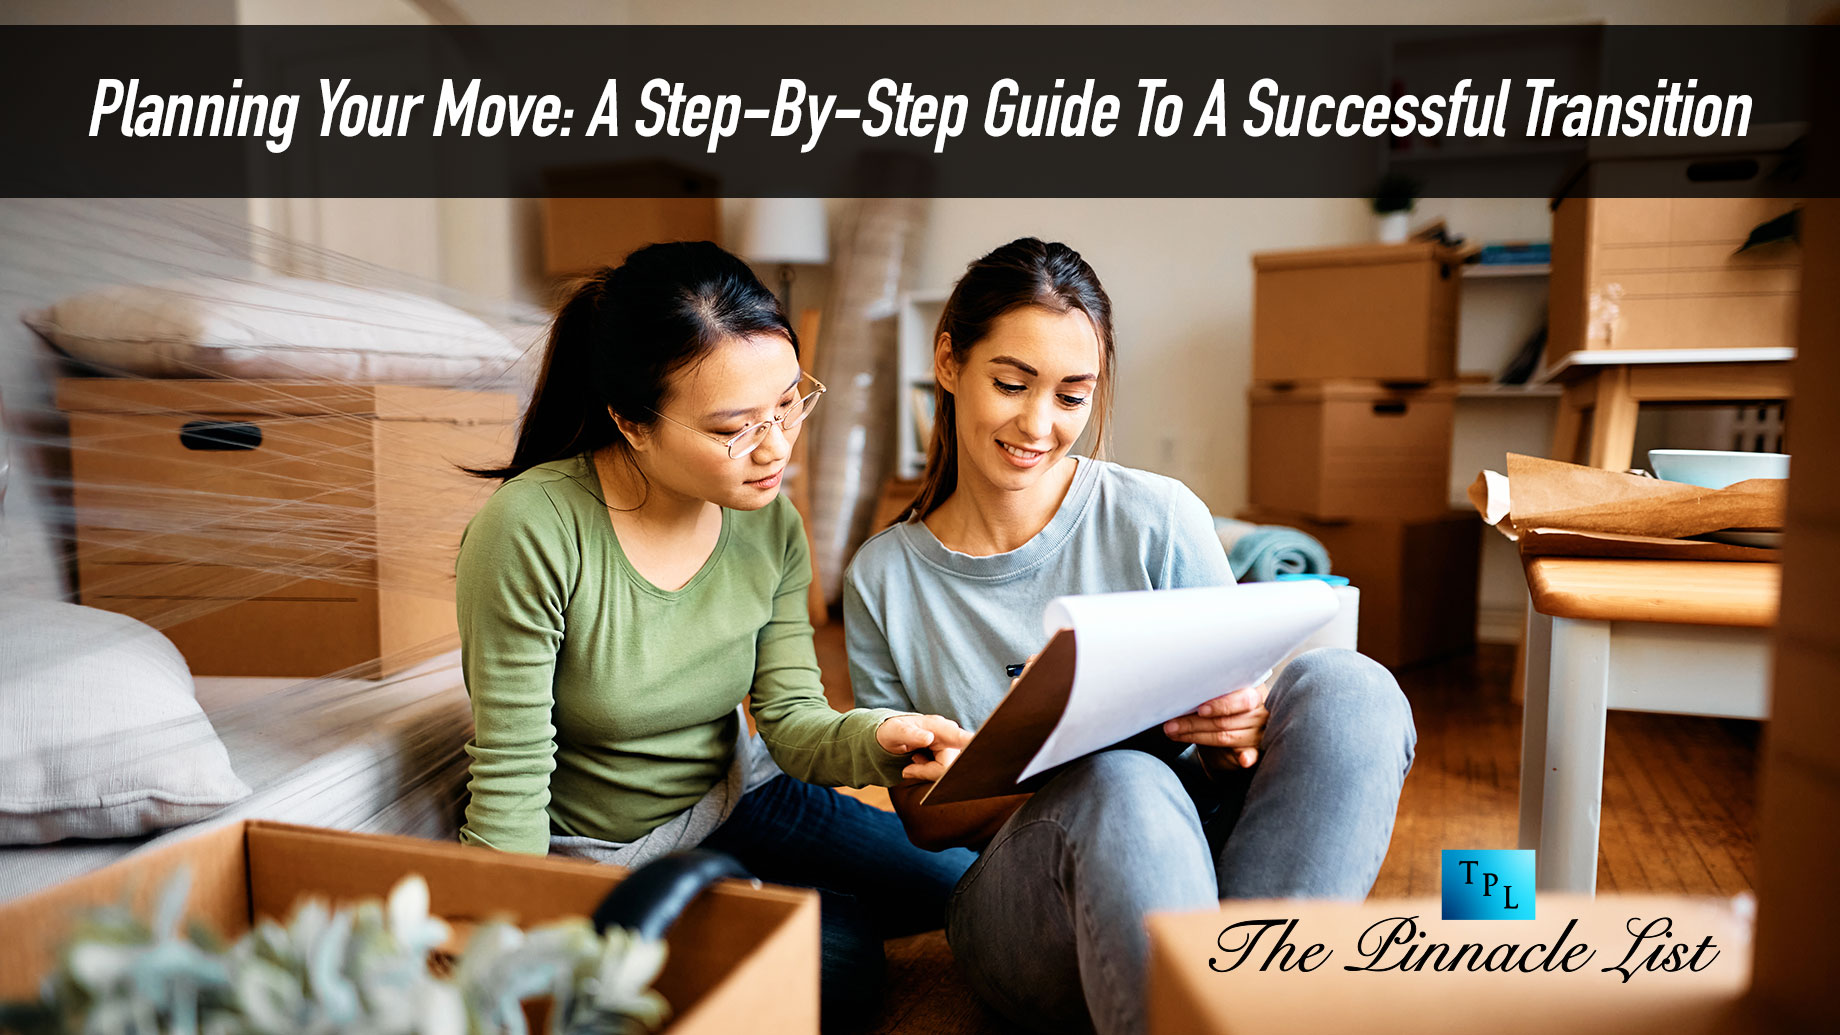 Planning Your Move: A Step-By-Step Guide To A Successful Transition